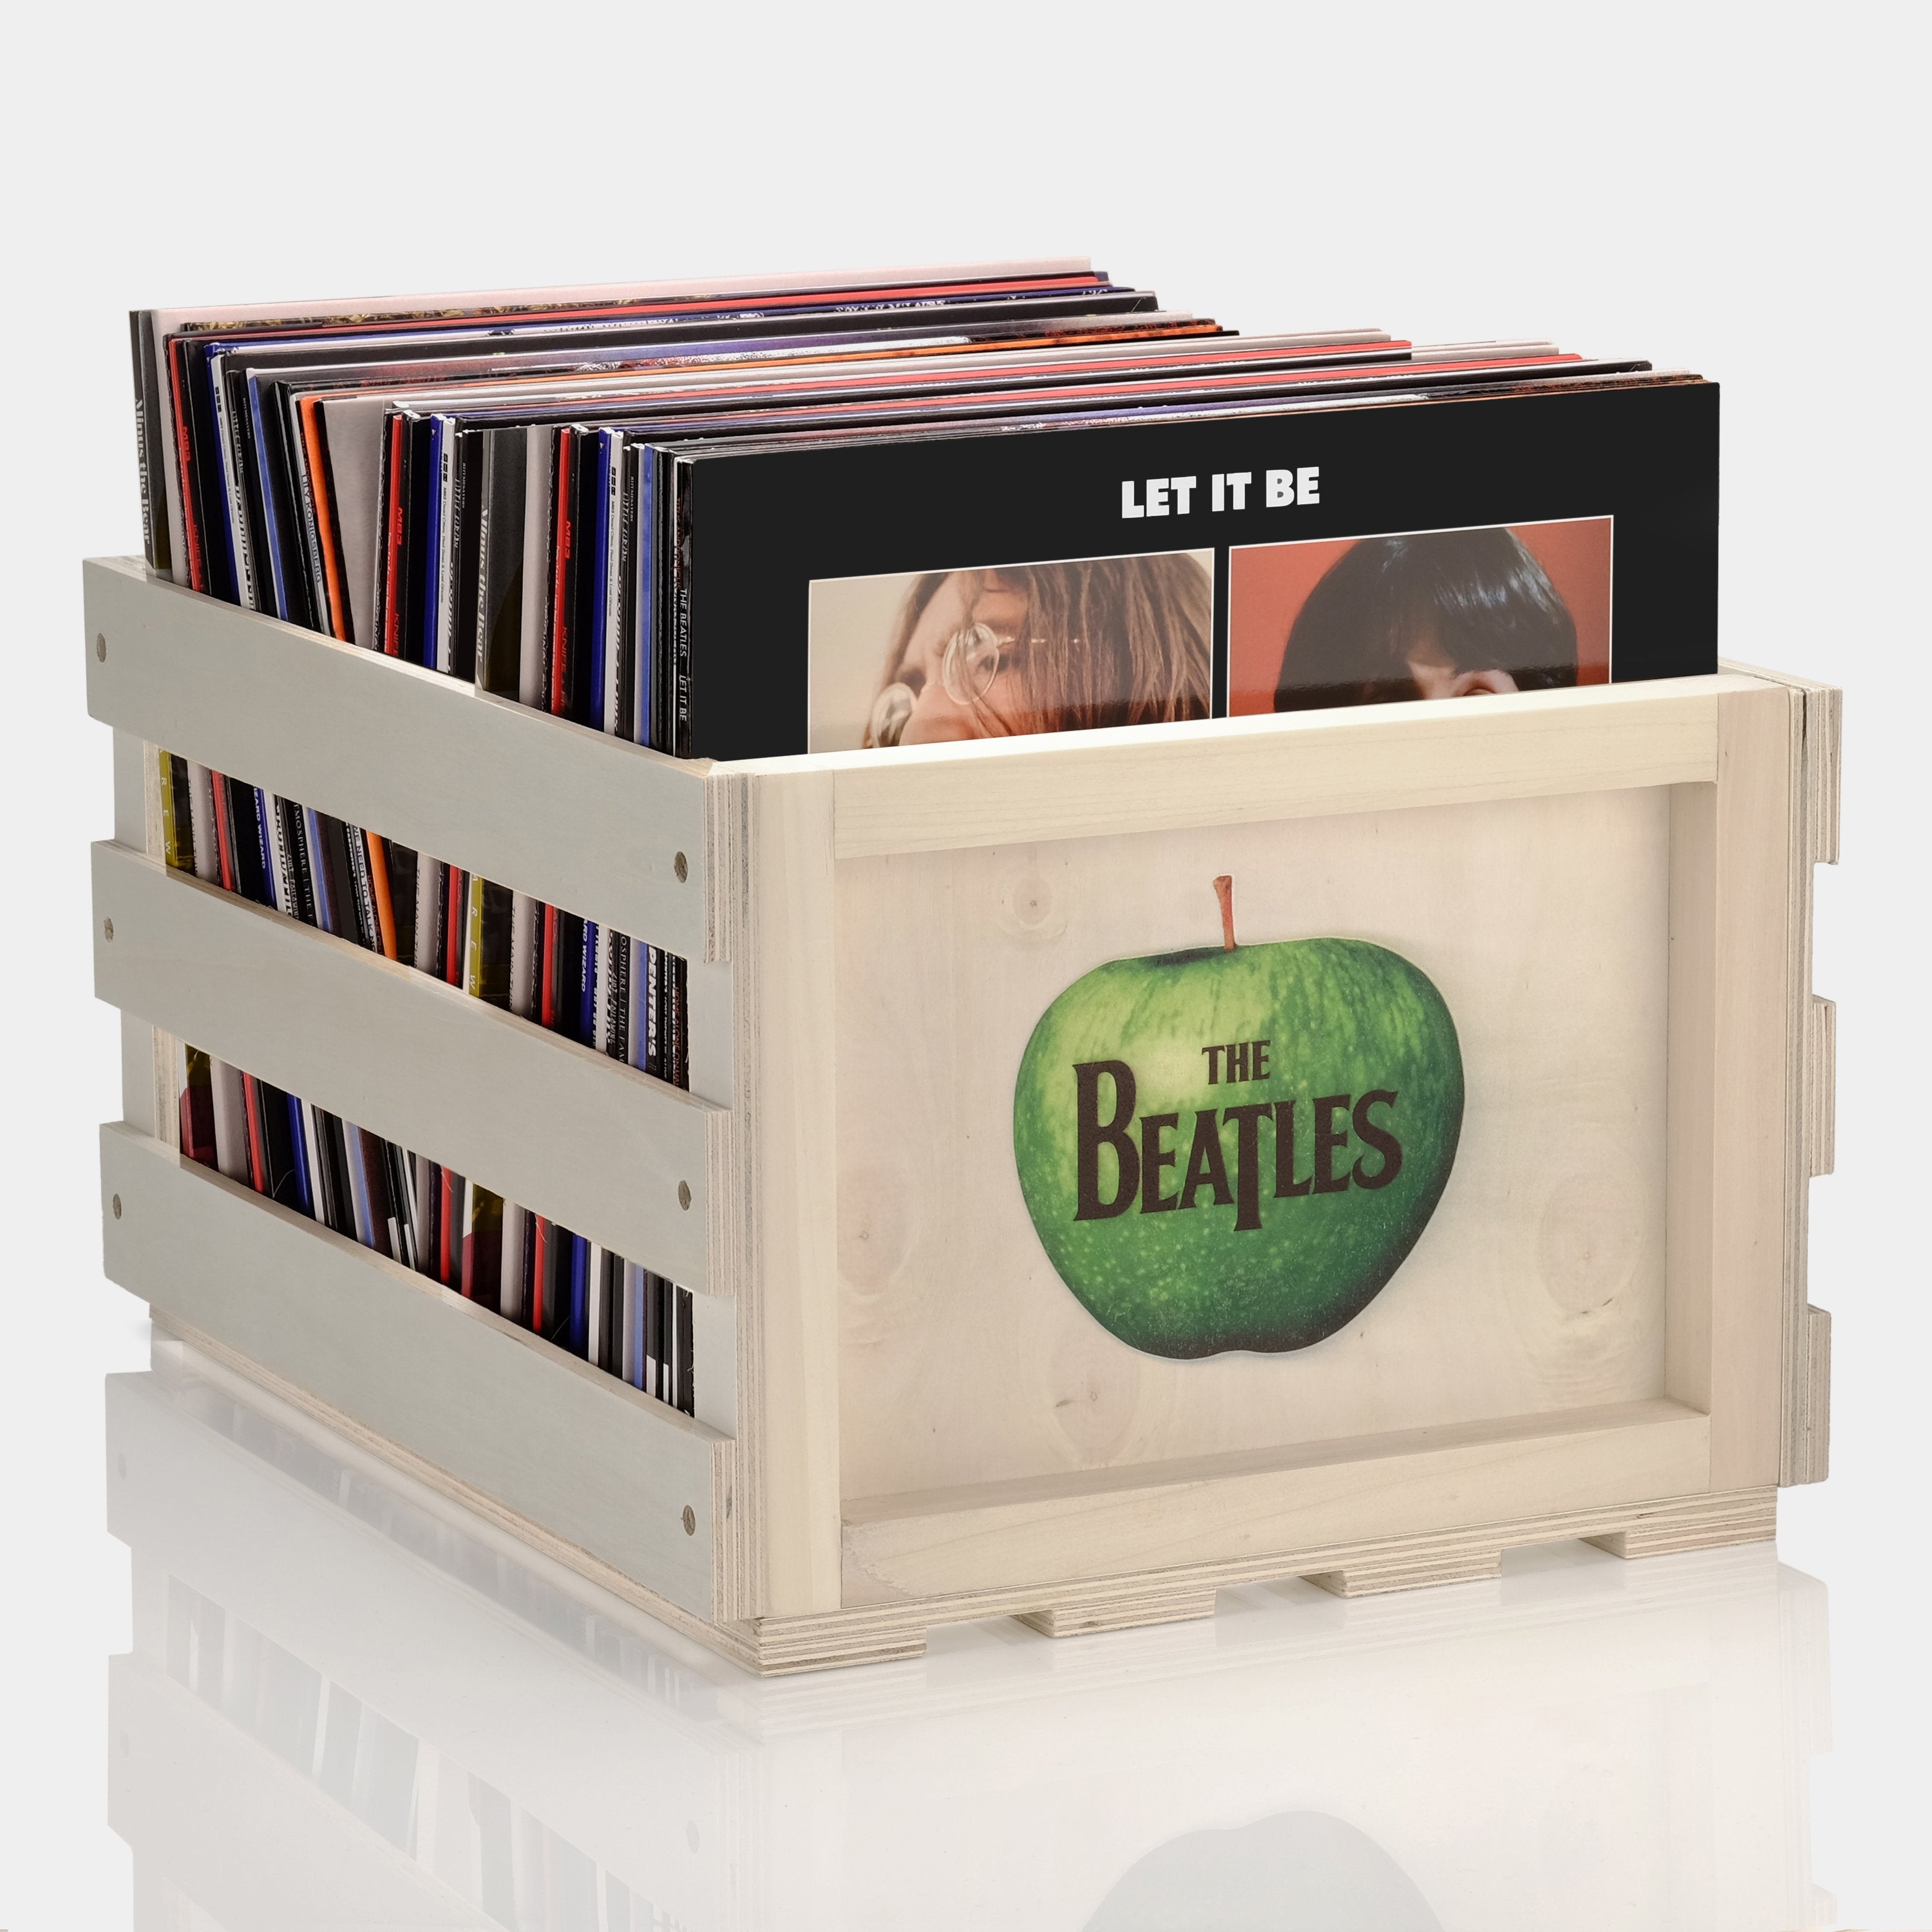 The Beatles Logo Record Storage Crate